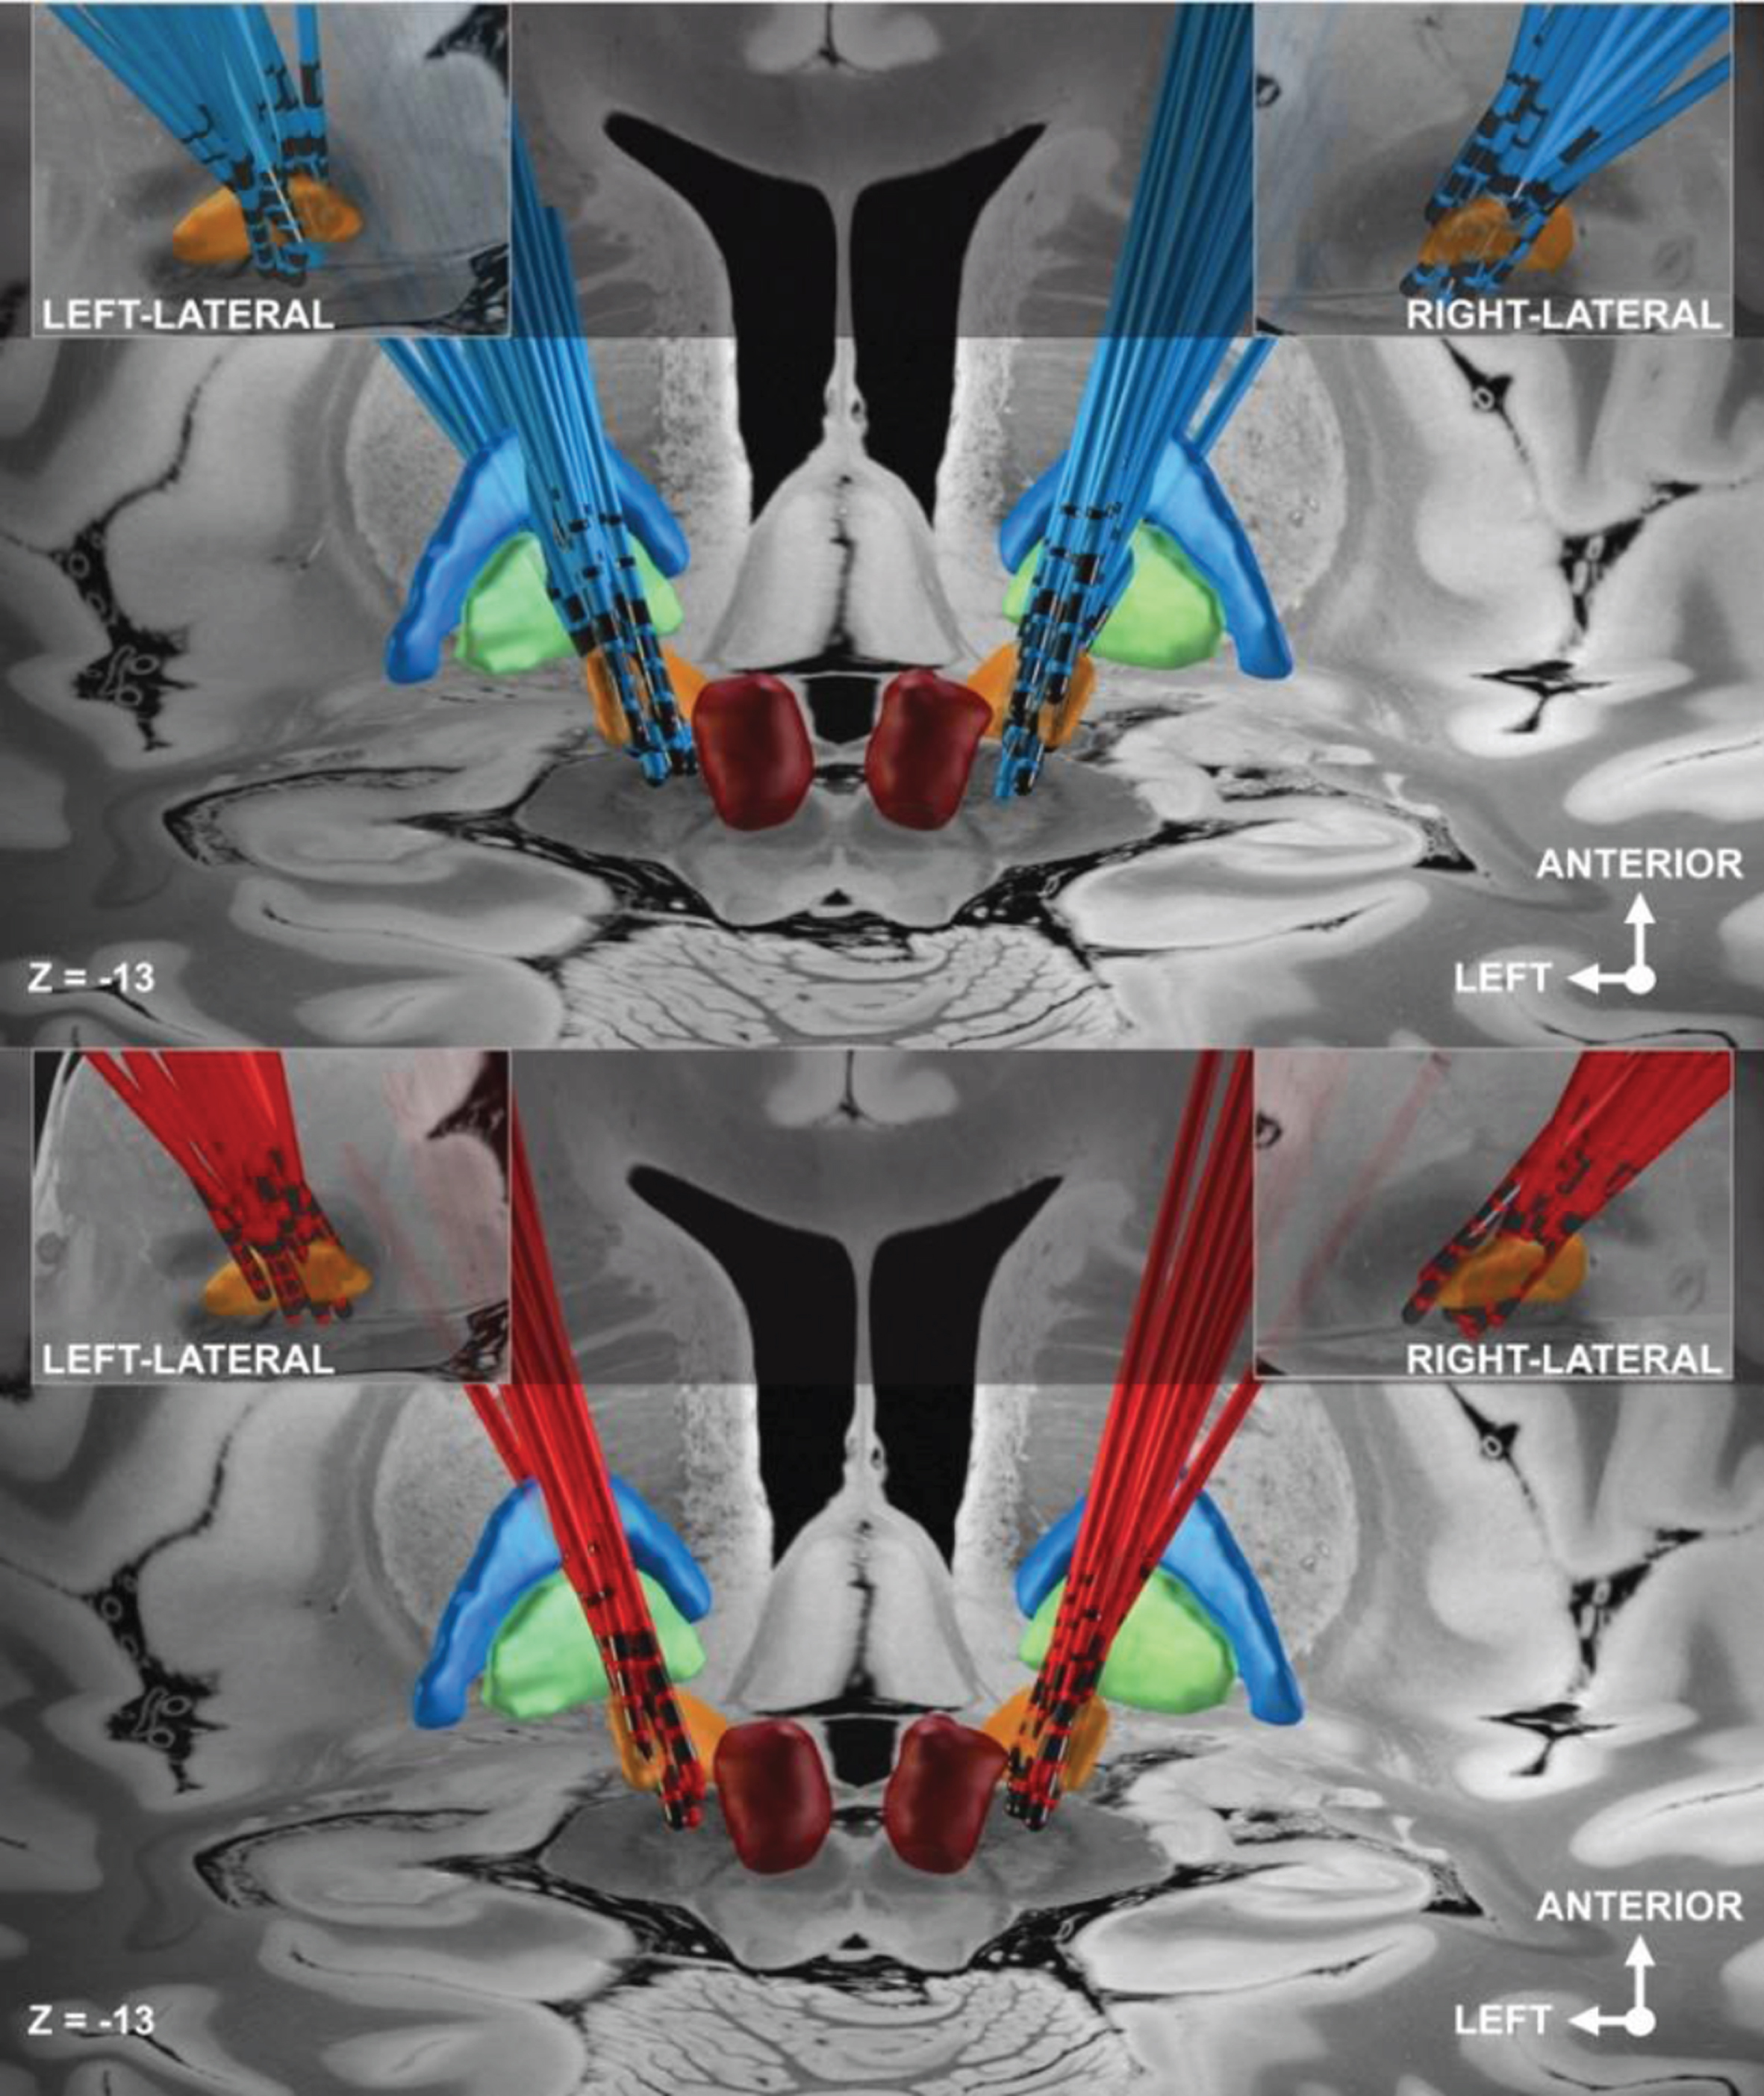 Visualization of electrode locations of the POD– (blue electrodes) and POD+ group (red electrodes). Dark red: red nucleus; orange: STN; green: Globus pallidus internus (GPi); blue: Globus pallidus externus (GPe).